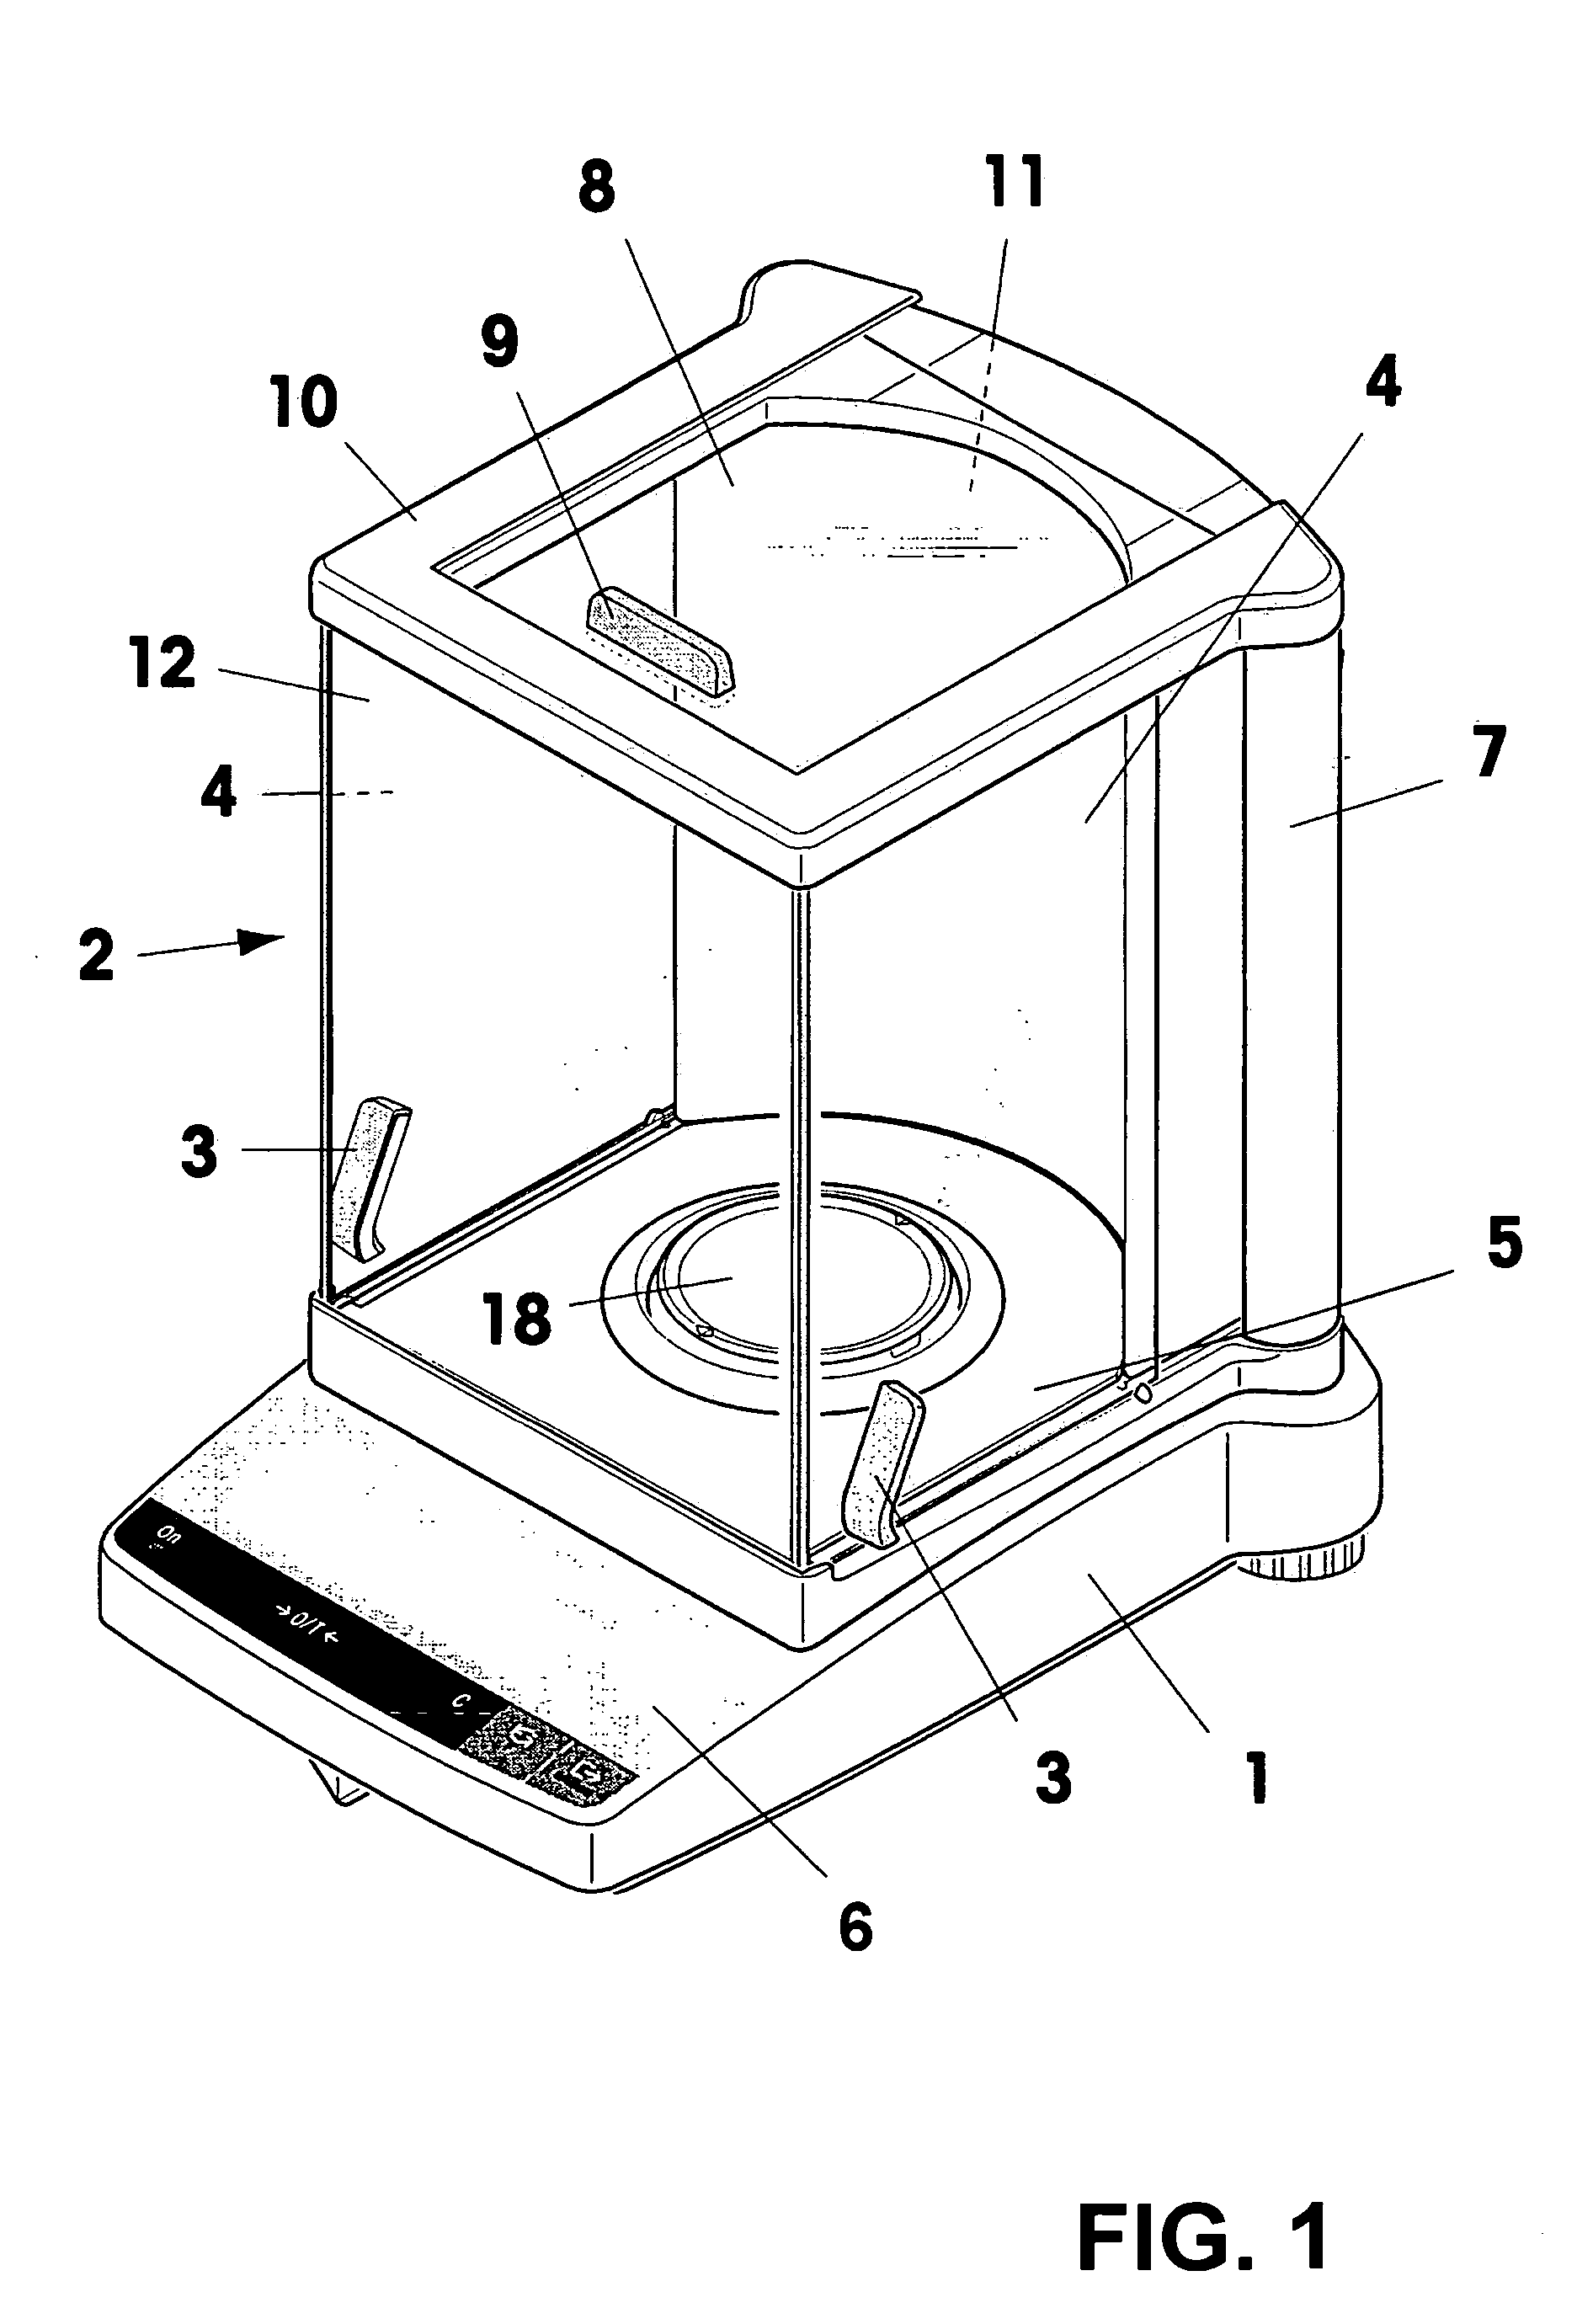 Device for monitoring the operating conditions of a balance